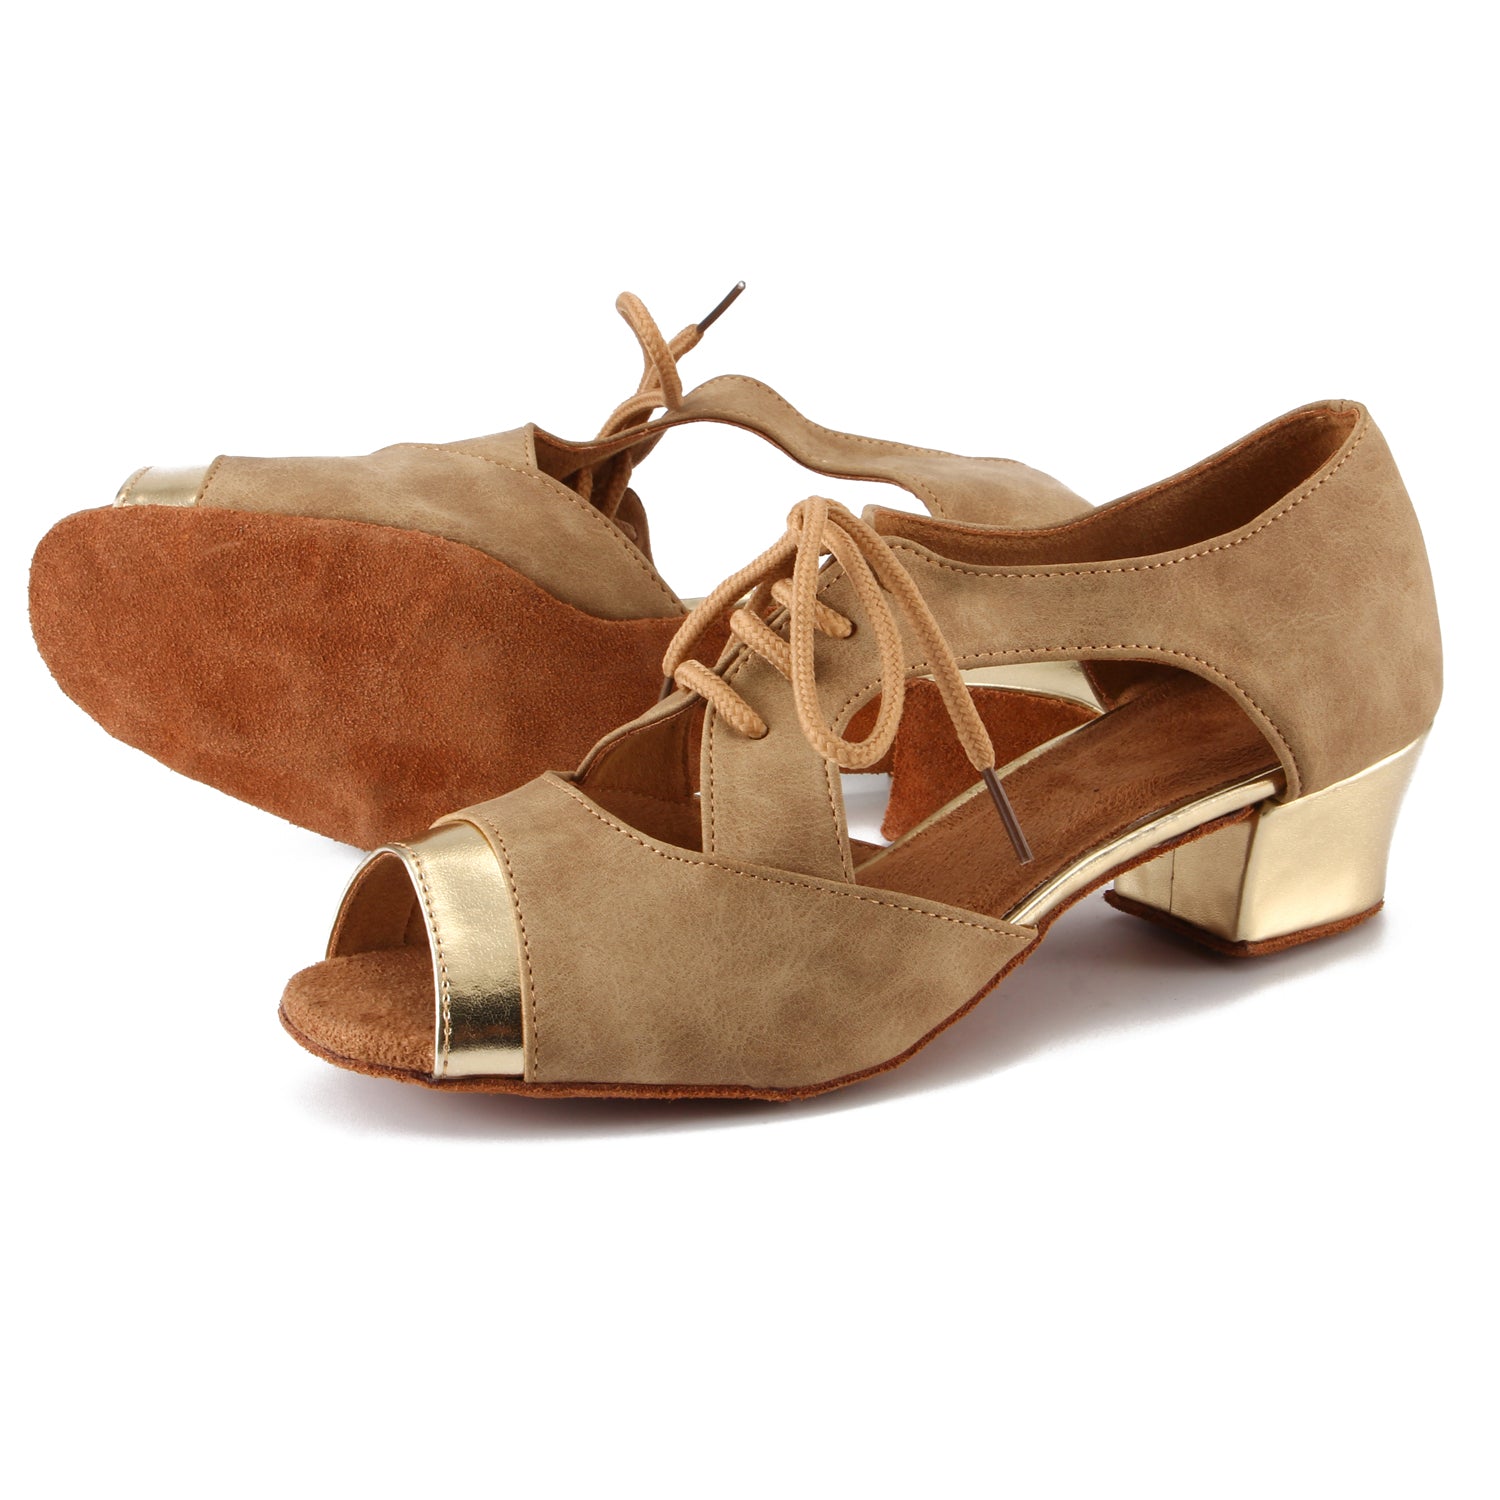 Women Ballroom Dancing Shoes with Suede Sole, Lace-up Open-toe Design in Brown and Gold for Tango Latin Practice (PD-3004B)2